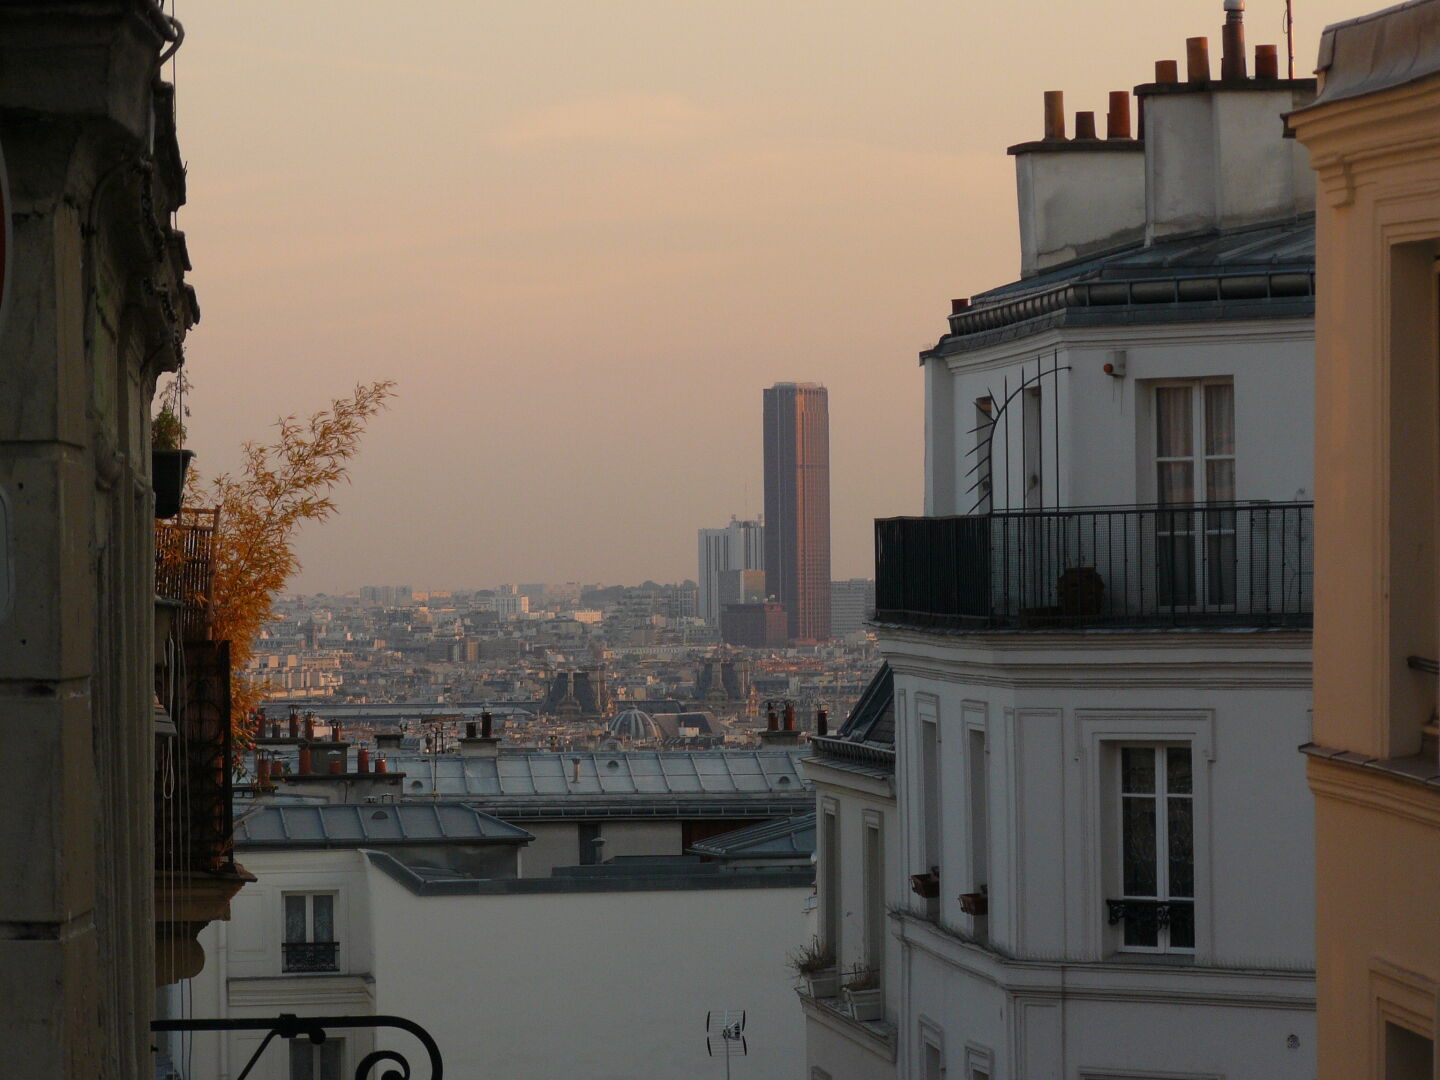 Evening sky over Paris.  Tour Montparnasse is visible in the distance.